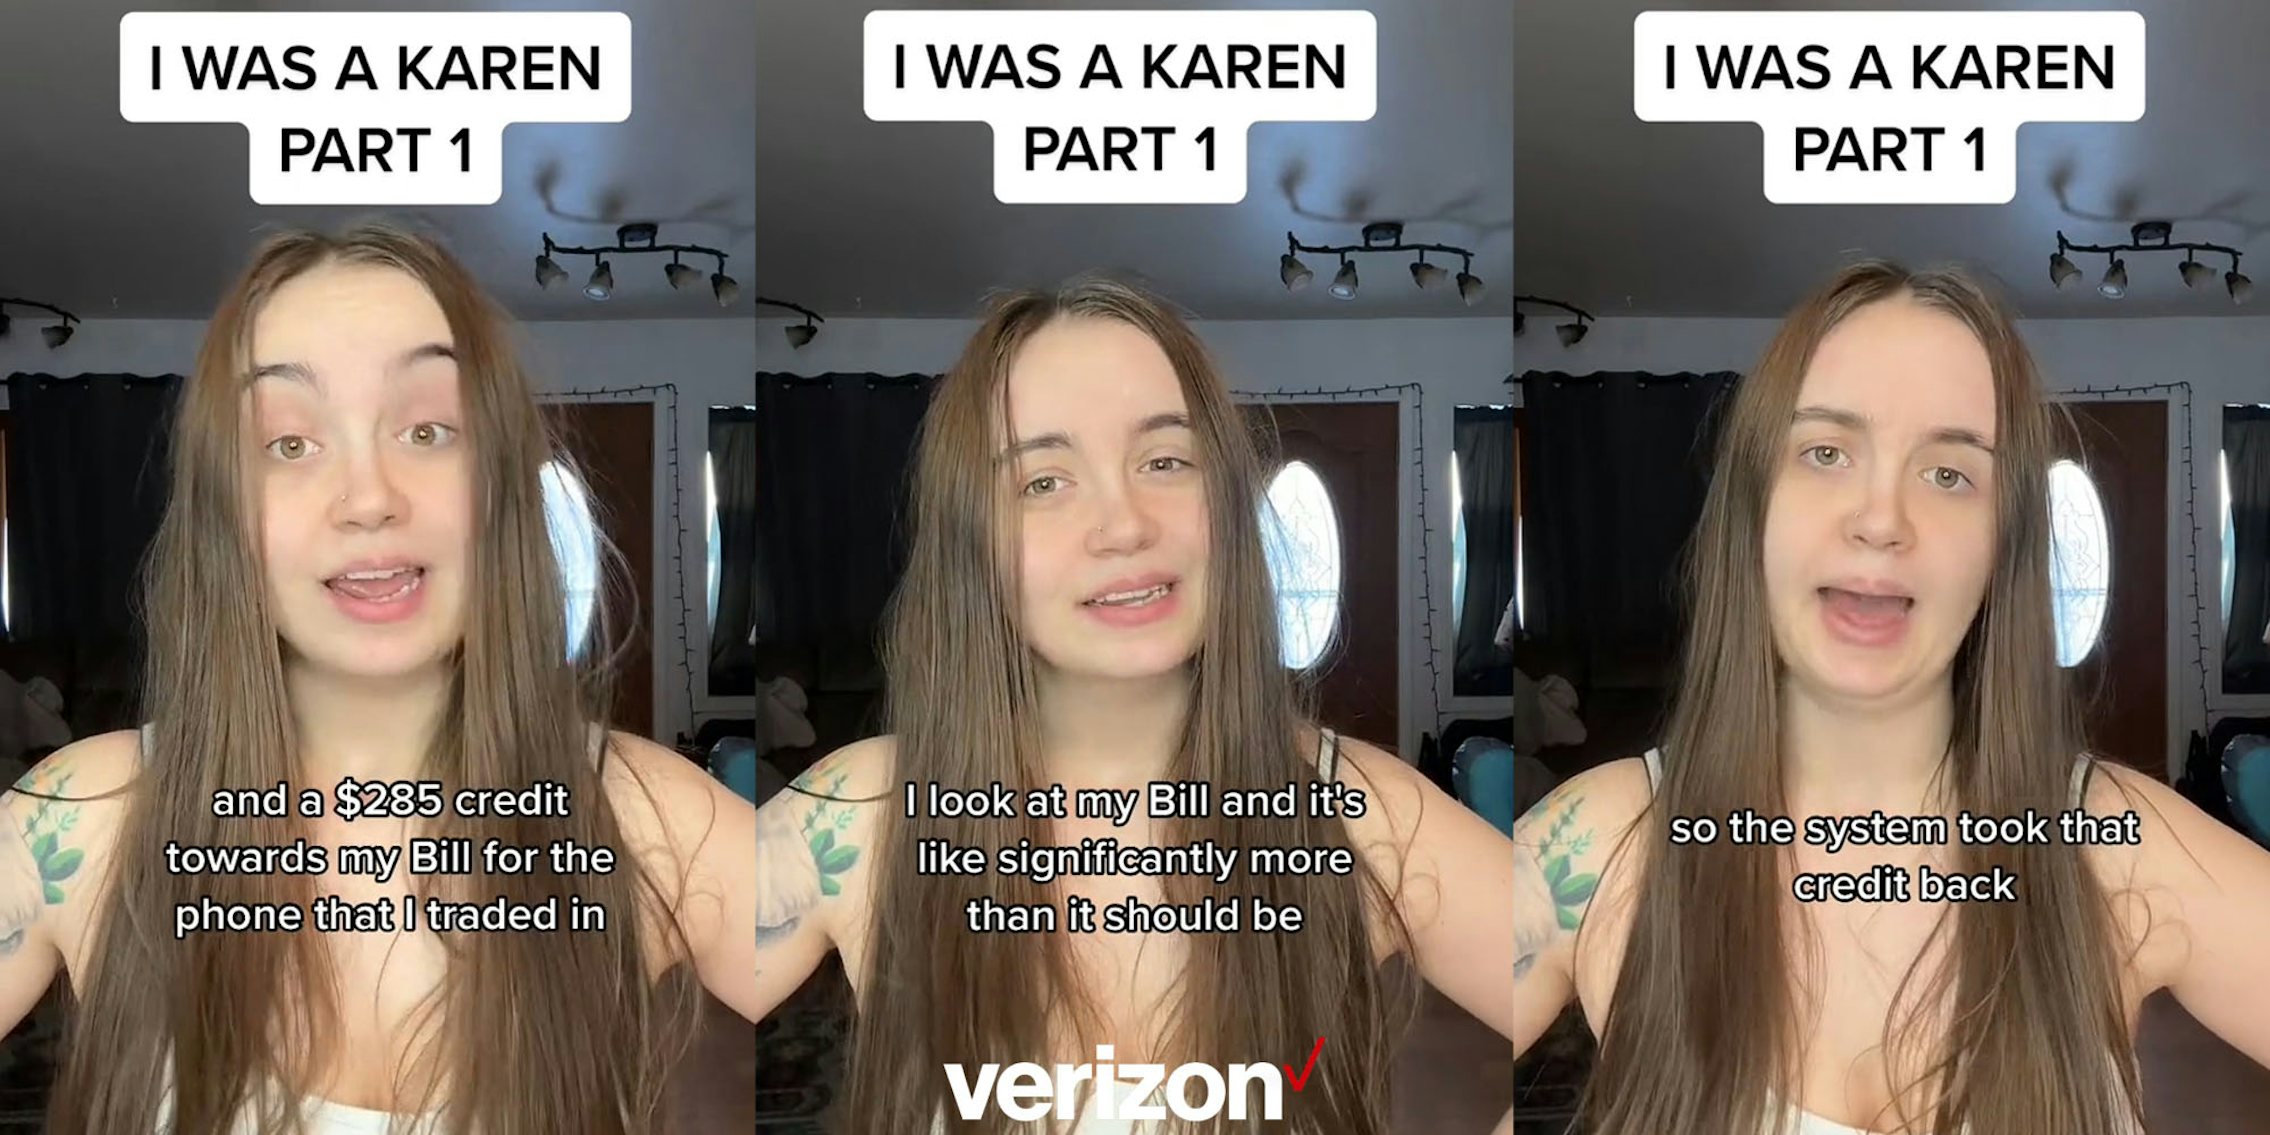 woman speaking caption 'I WAS A KAREN PART 1' 'and a $285 credit towards my bill for the phone that I traded in' (l) woman speaking caption 'I WAS A KAREN PART 1' 'I look at my bill and it's like significantly more than it should be' with Verizon logo centered at bottom (c) woman speaking caption 'I WAS A KAREN PART 1' 'so the system took that credit back' (r)